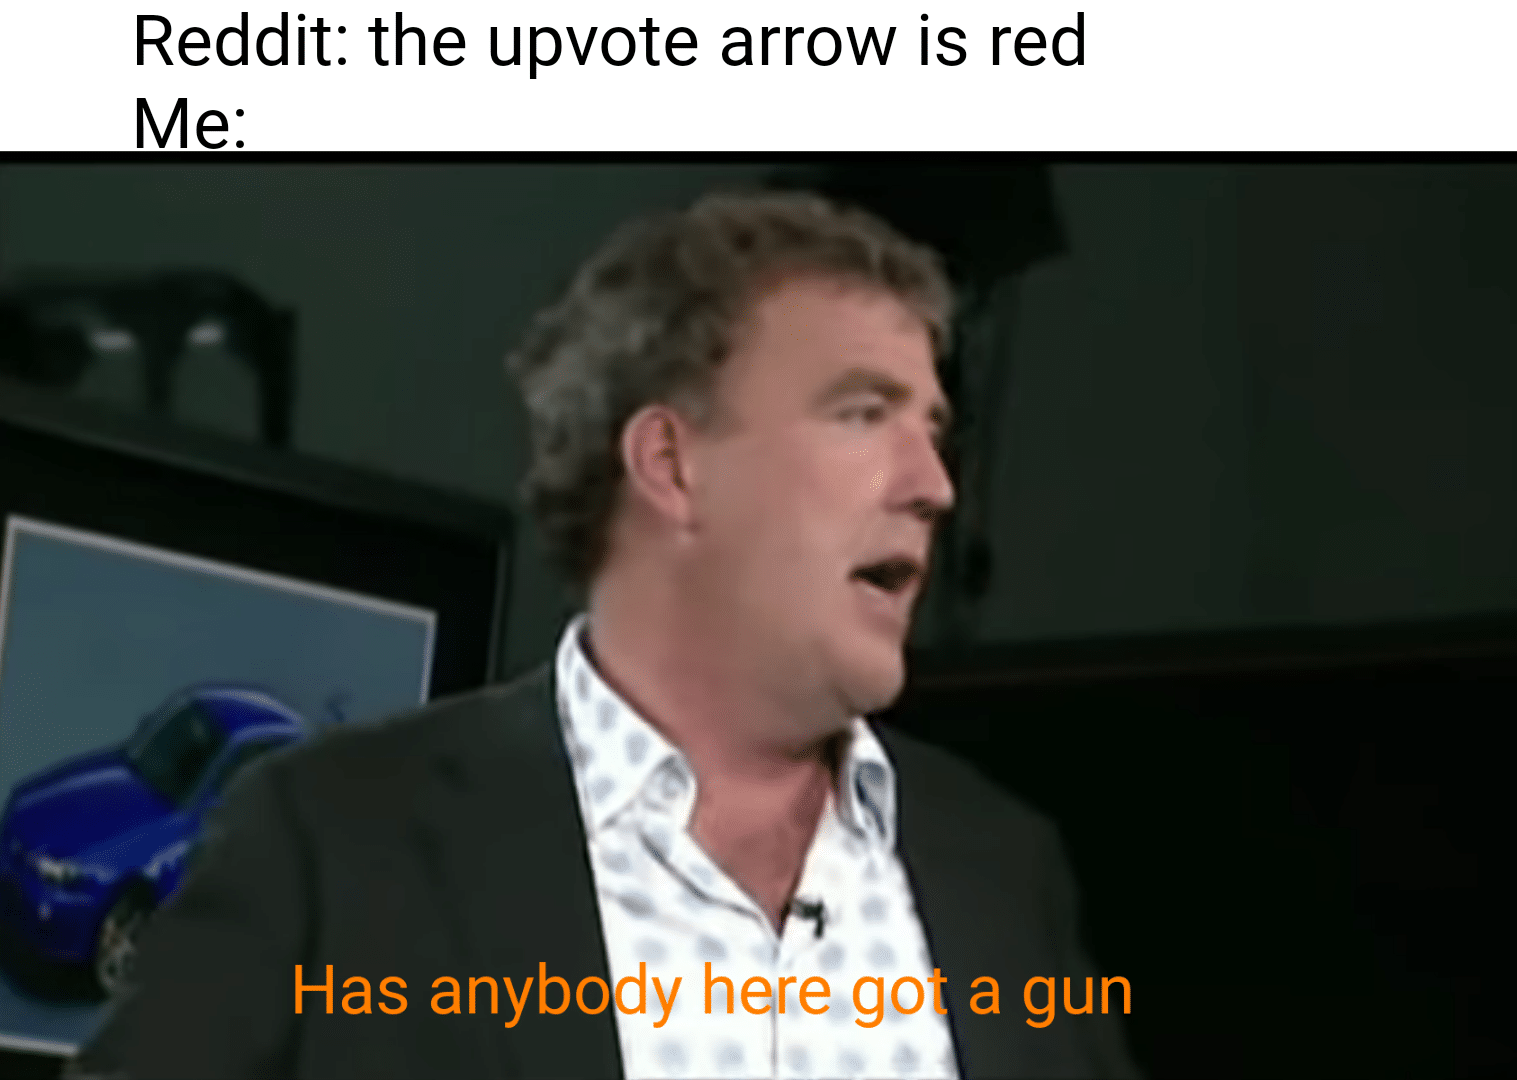 dank other-memes dank text: Reddit: the upvote arrow is red 'dy heire'go Has anybo a gun 